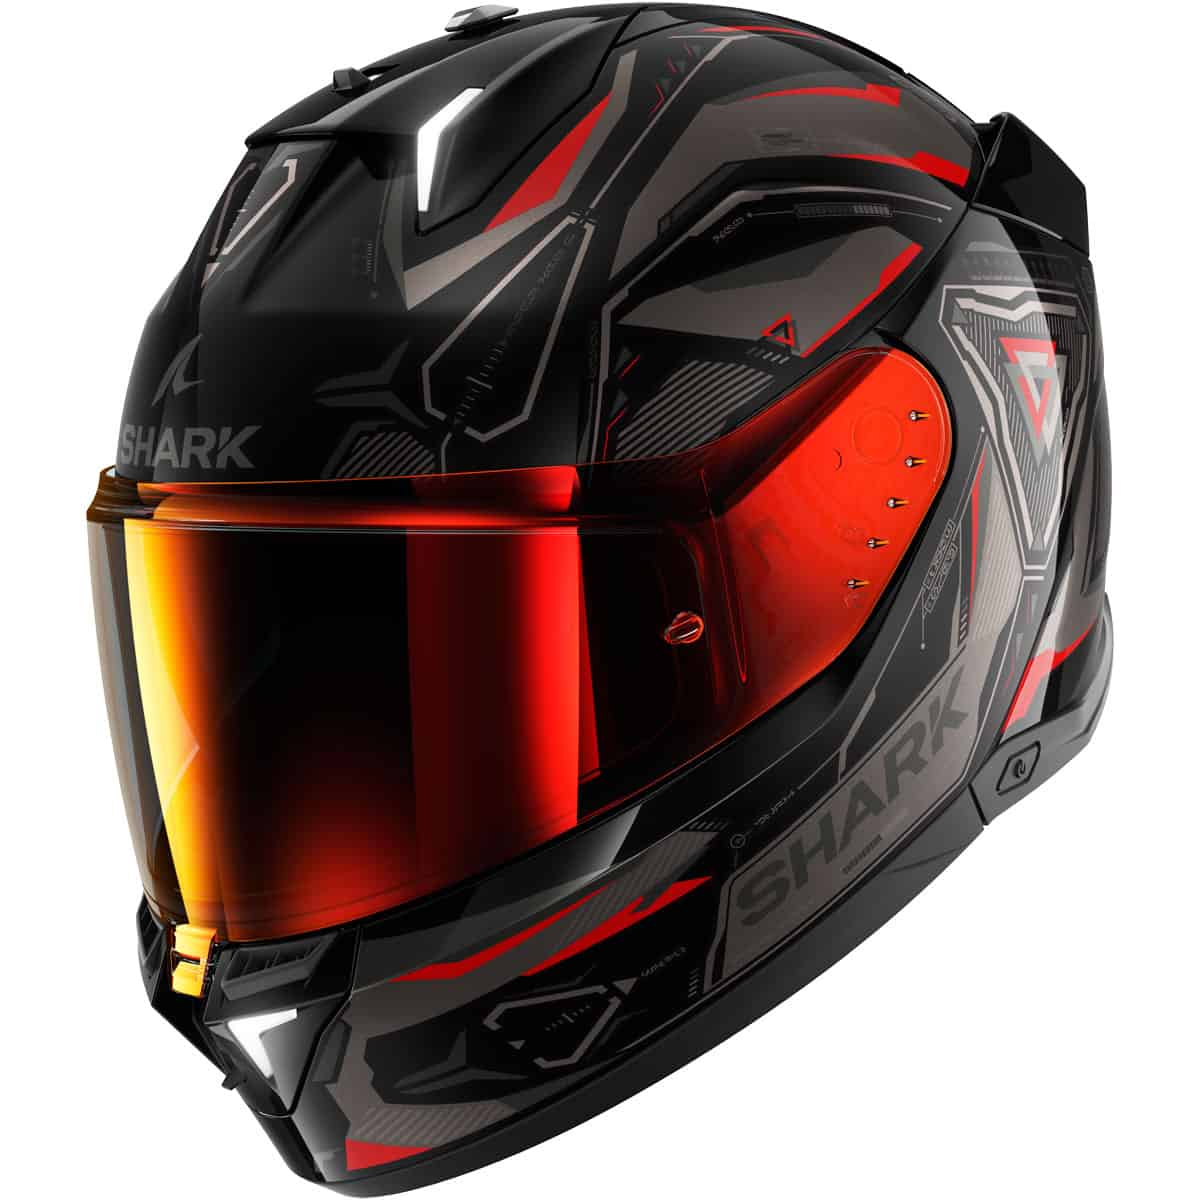 The Shark Skwal i3 helmet provides exceptional comfort, including features such as a Pinlock-equipped visor and adjustable interior settings, perfect for glasses wearers.  5